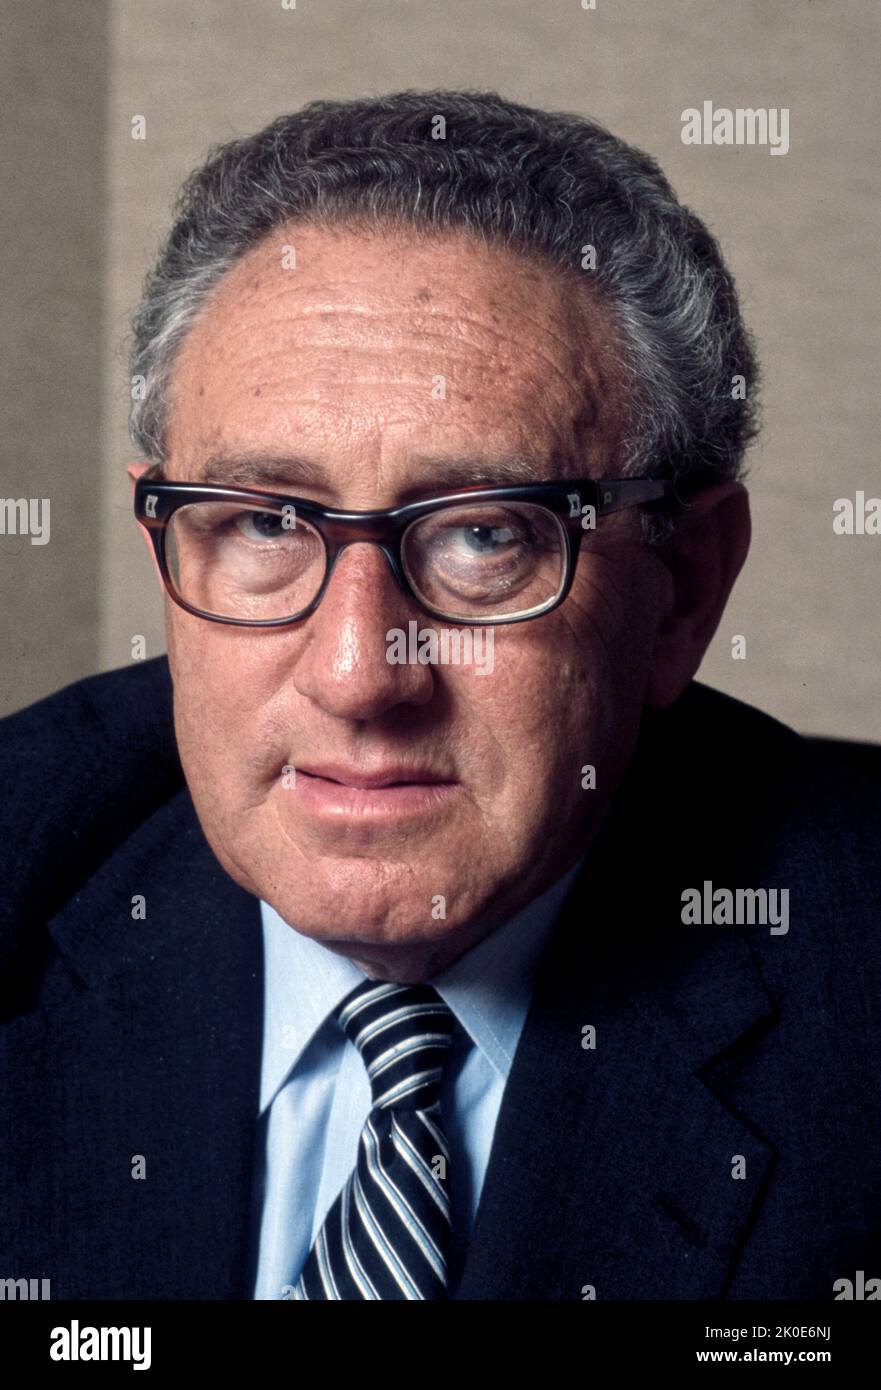 Henry Alfred Kissinger (born 1923), American politician, diplomat, and geopolitical consultant who served as United States Secretary of State and National Security Advisor under the presidential administrations of Richard Nixon and Gerald Ford. A Jewish refugee who fled Nazi Germany with his family in 1938, he became National Security Advisor in 1969 and U.S. Secretary of State in 1973. For his actions negotiating a ceasefire in Vietnam, Kissinger received the 1973 Nobel Peace Prize. Stock Photo